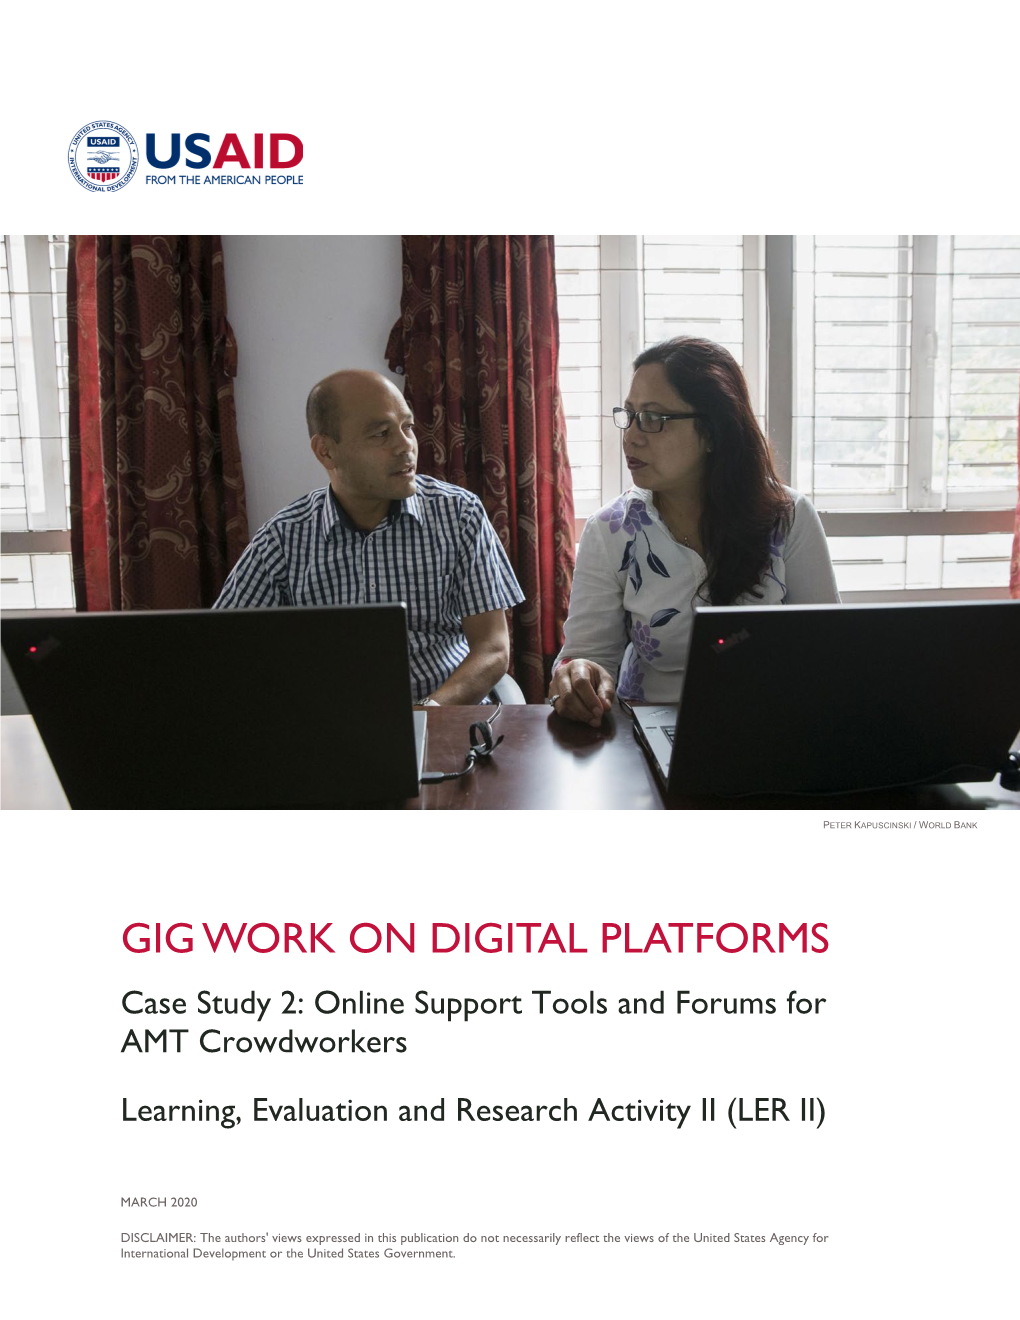 GIG WORK on DIGITAL PLATFORMS Case Study 2: Online Support Tools and Forums for AMT Crowdworkers